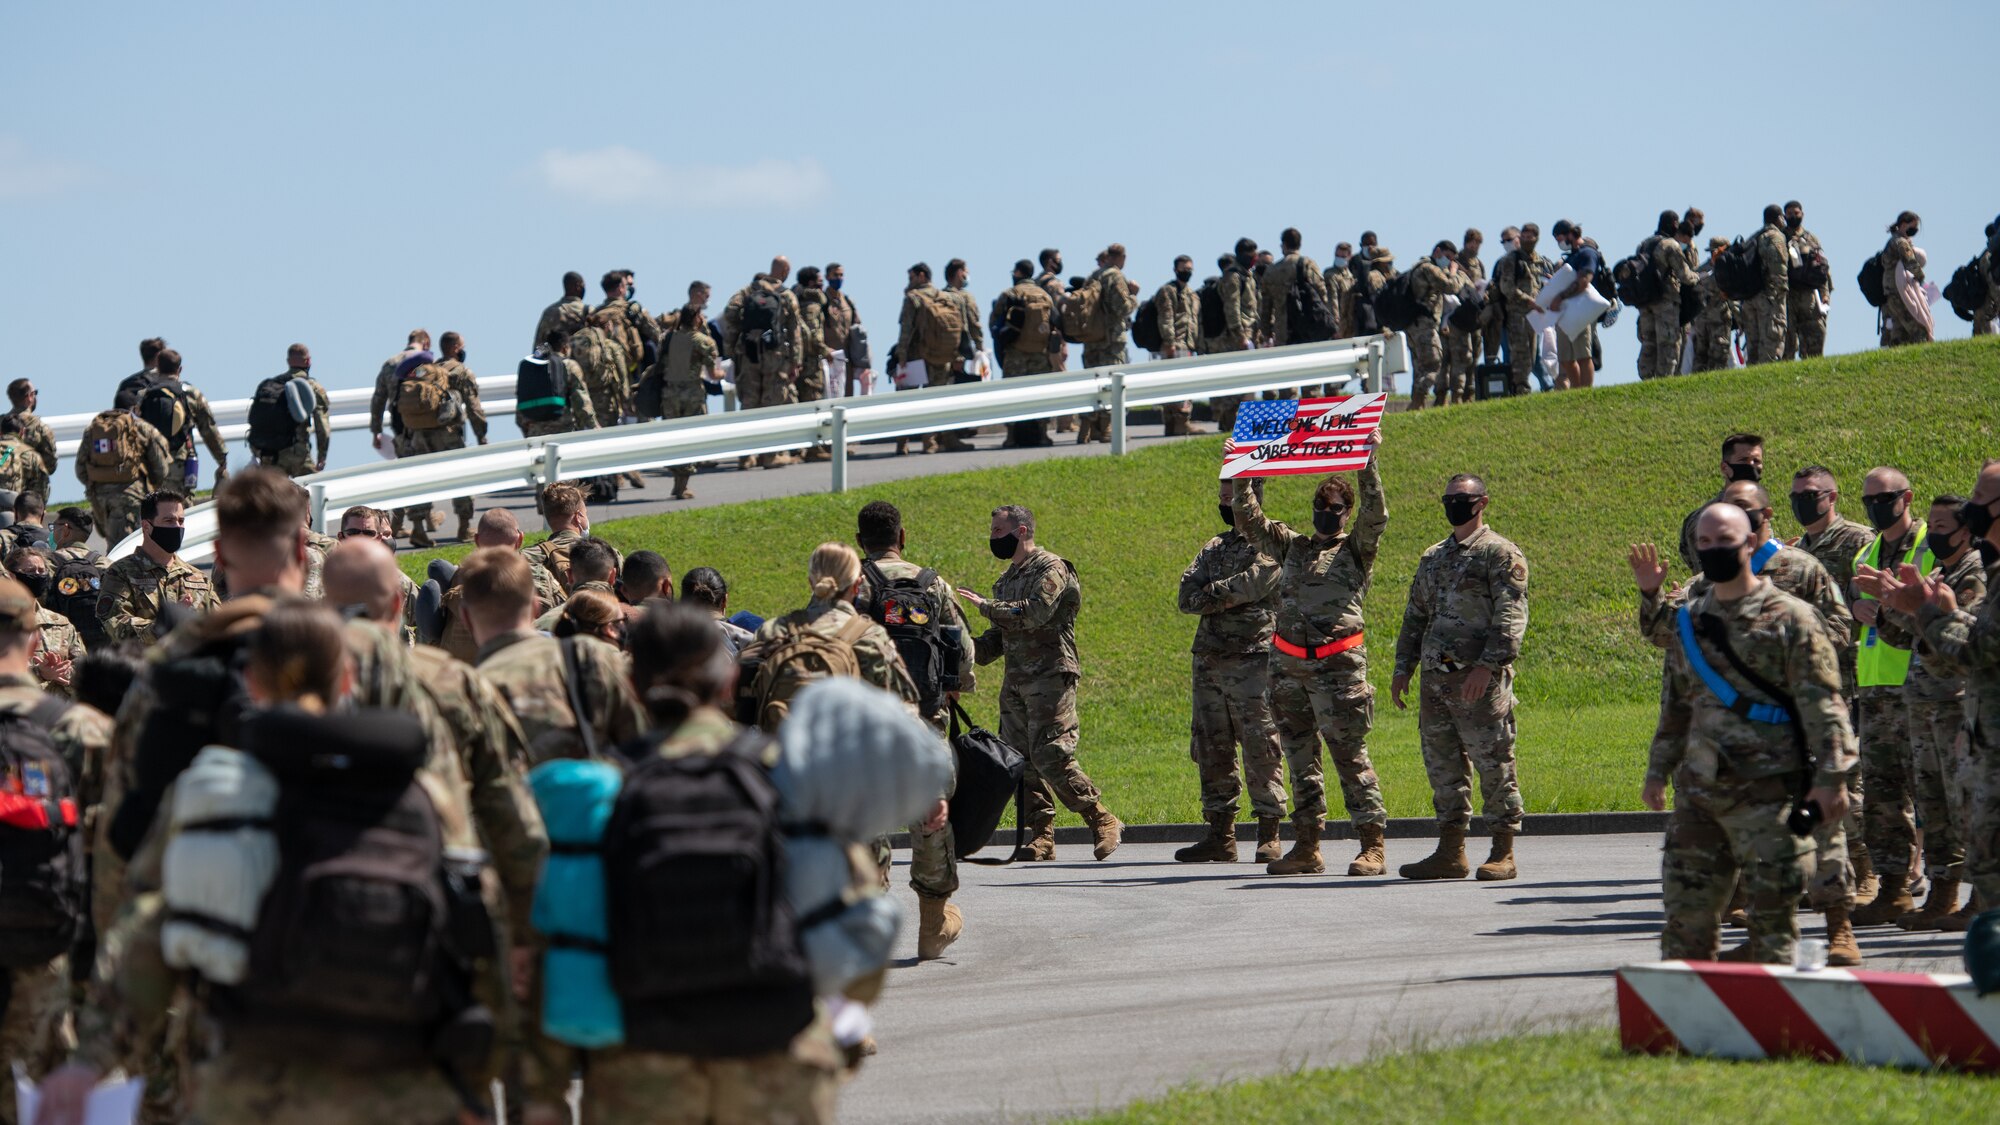 Members of the 18th Wing walk toward the air terminal at Kadena Air Base, Japan, after returning from a deployment to U.S. Central Command Oct. 6, 2020. More than 300 Airmen assigned to the 18th Operations and Maintenance Groups as well as pilots and aircraft assigned to the 44th Fighter Squadron deployed to the CENTCOM theater to defend U.S. and partner nation interests. During their deployment, Airmen conducted more than 1,000 sorties and 5,300 combat hours, which drove 13 phase inspections in six months. They’ll share the skills they learned in combat with Team Kadena, joint partners and allies to ensure a free and open Indo-Pacific. (U.S. Air Force photo by Staff Sgt. Peter Reft)